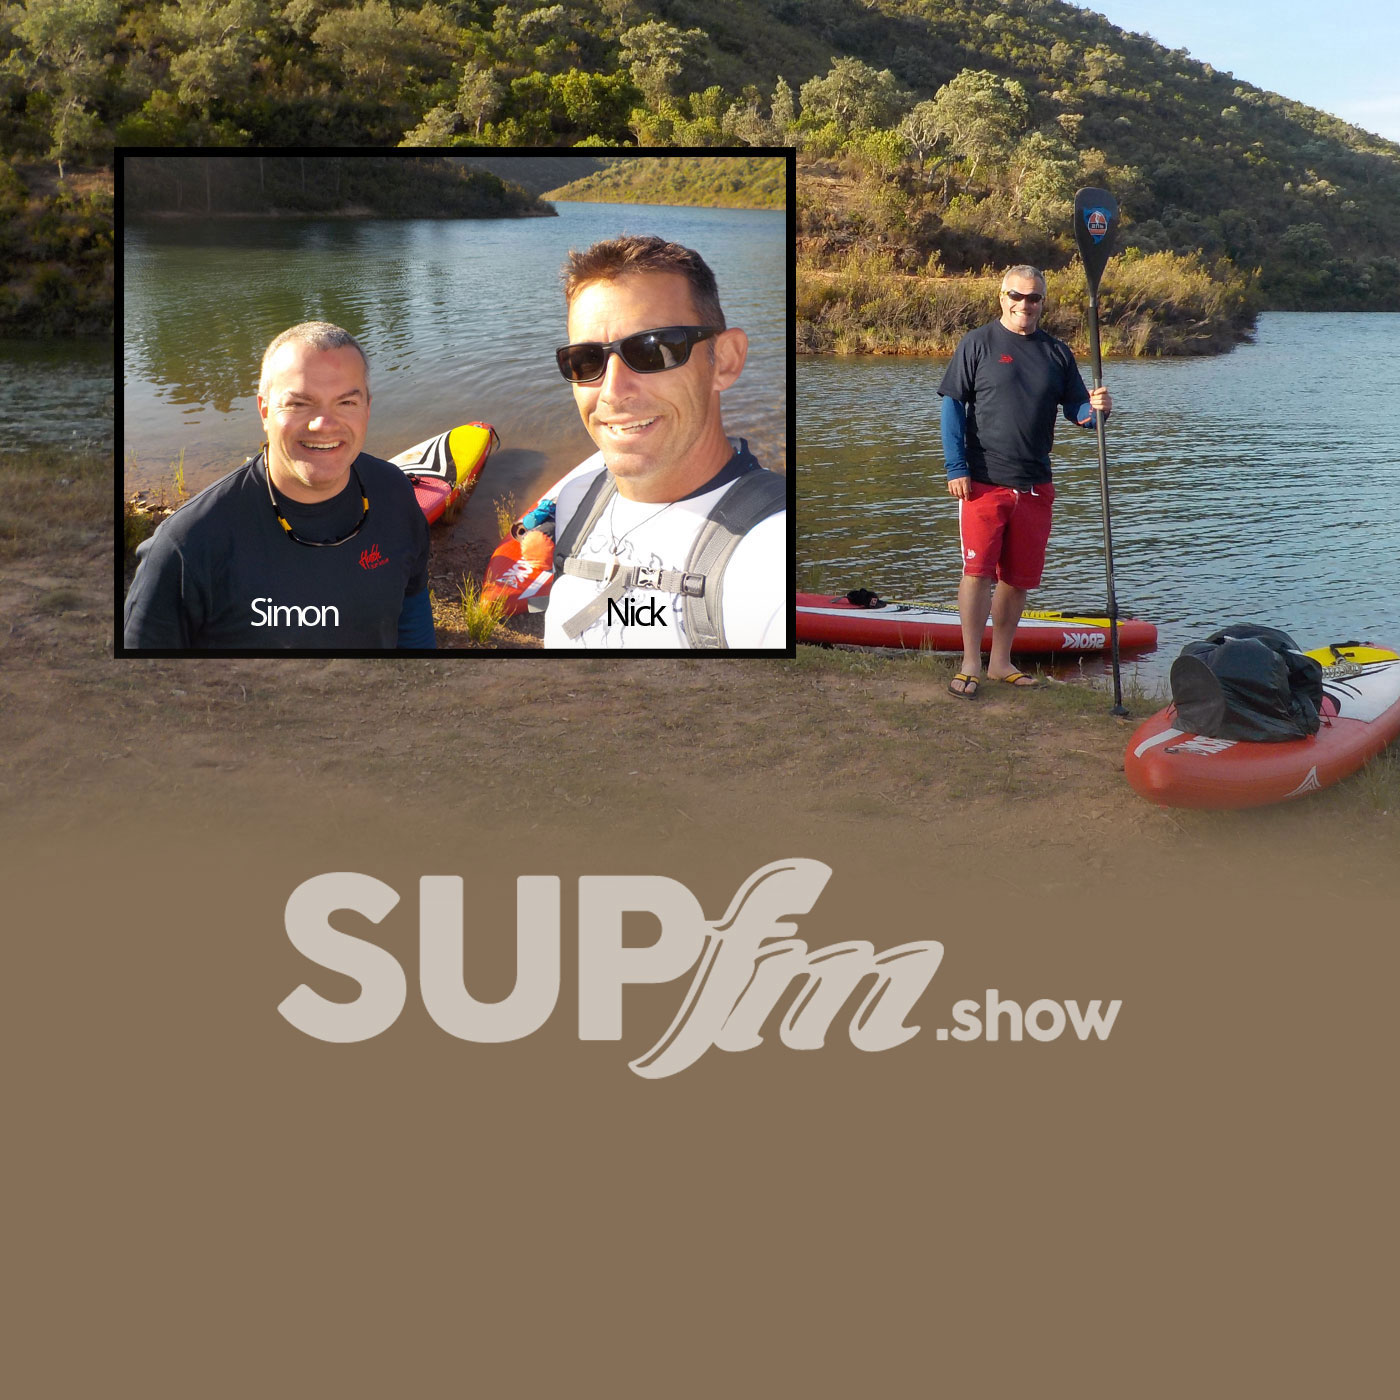 Artwork for podcast SUPfm  The International Stand Up Paddle Board Podcast